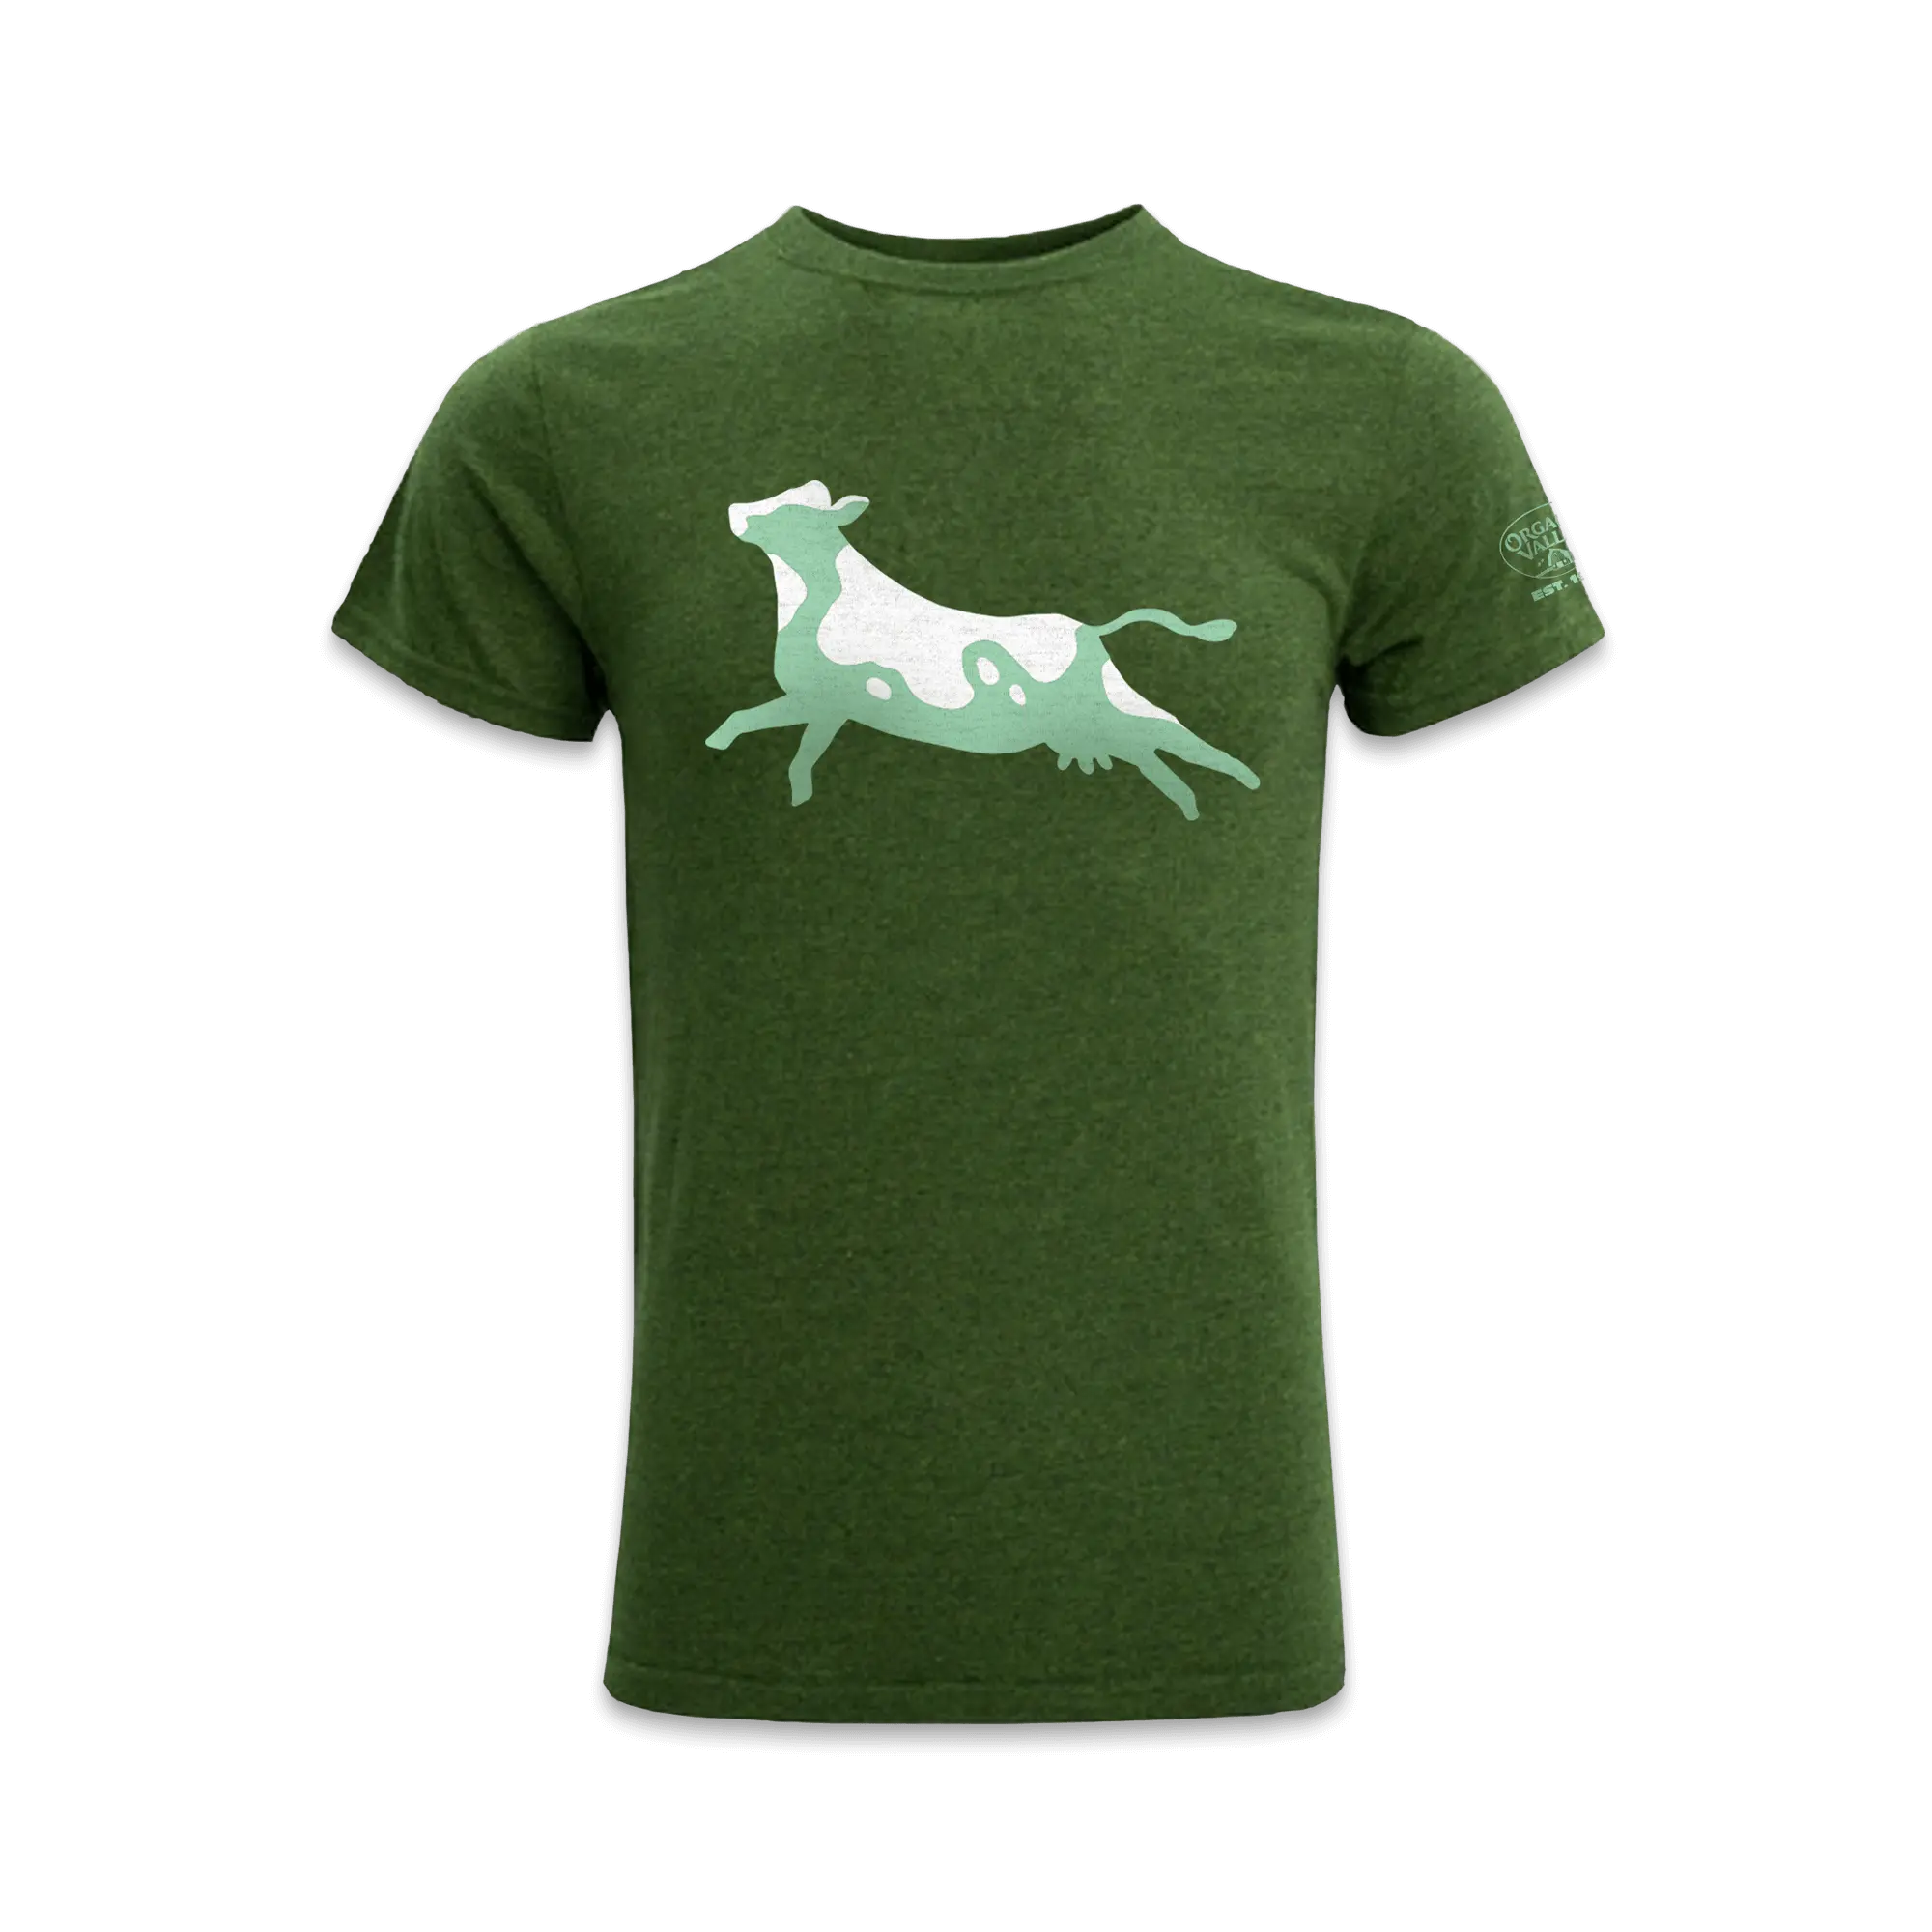 Visit the Leaping Cow Tee Product Page